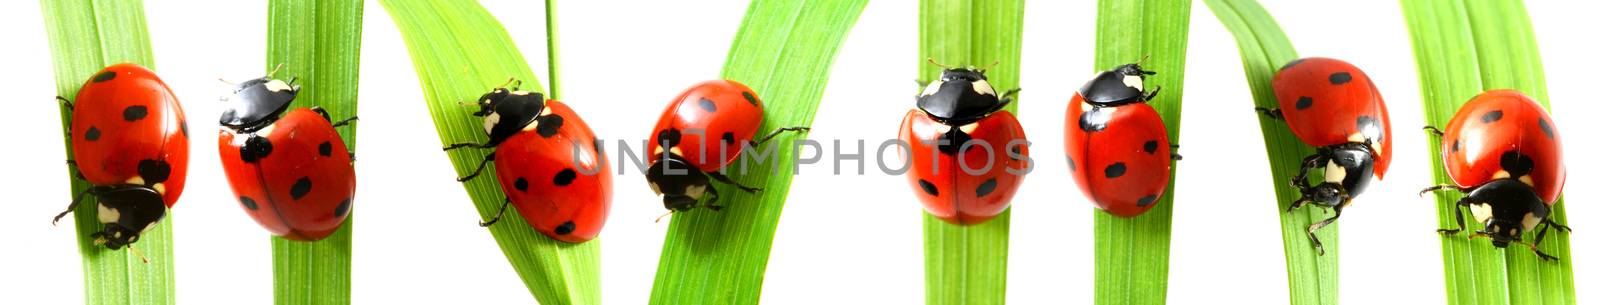 red ladybug on grass by Yellowj